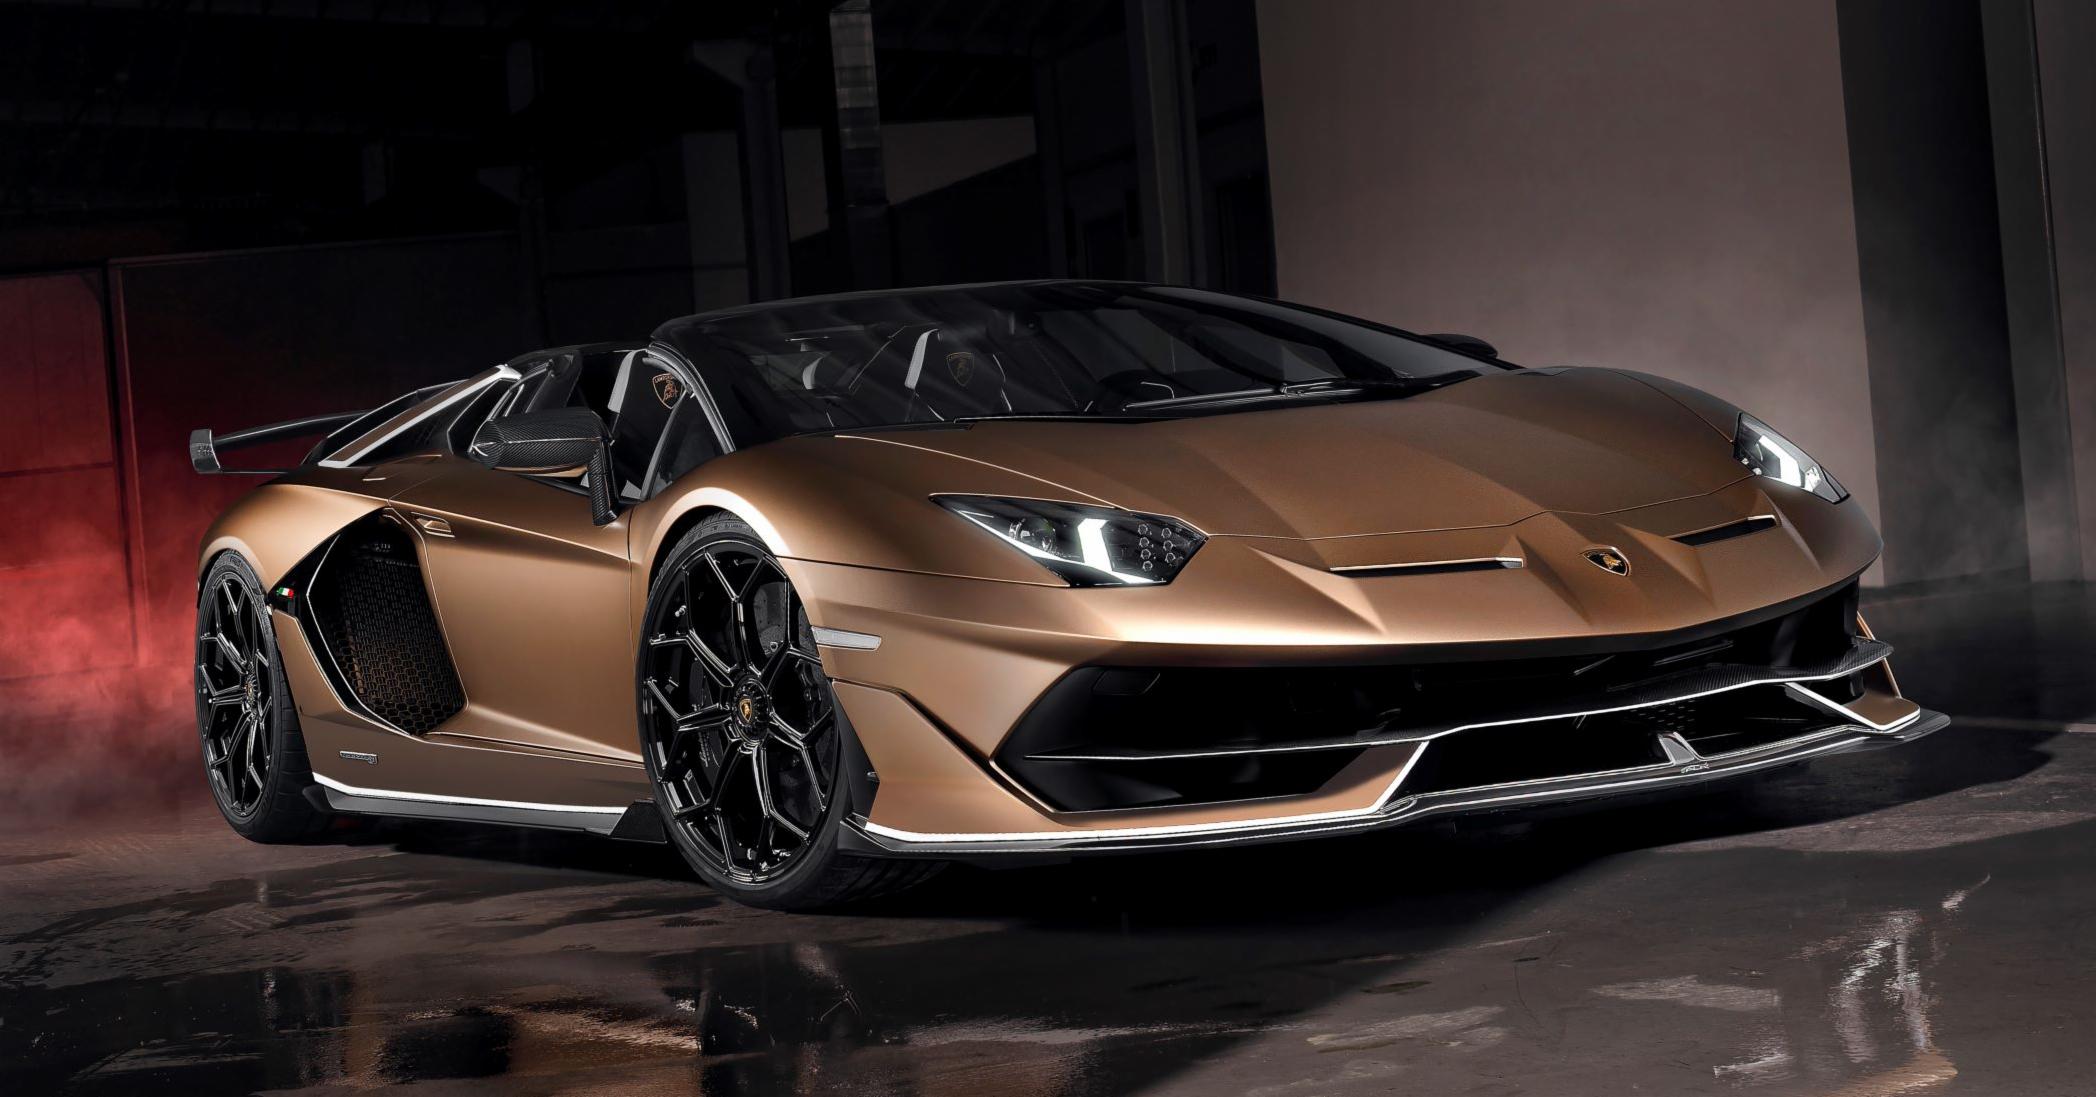 Lamborghini could hit 10,000 sales this year, CEO says